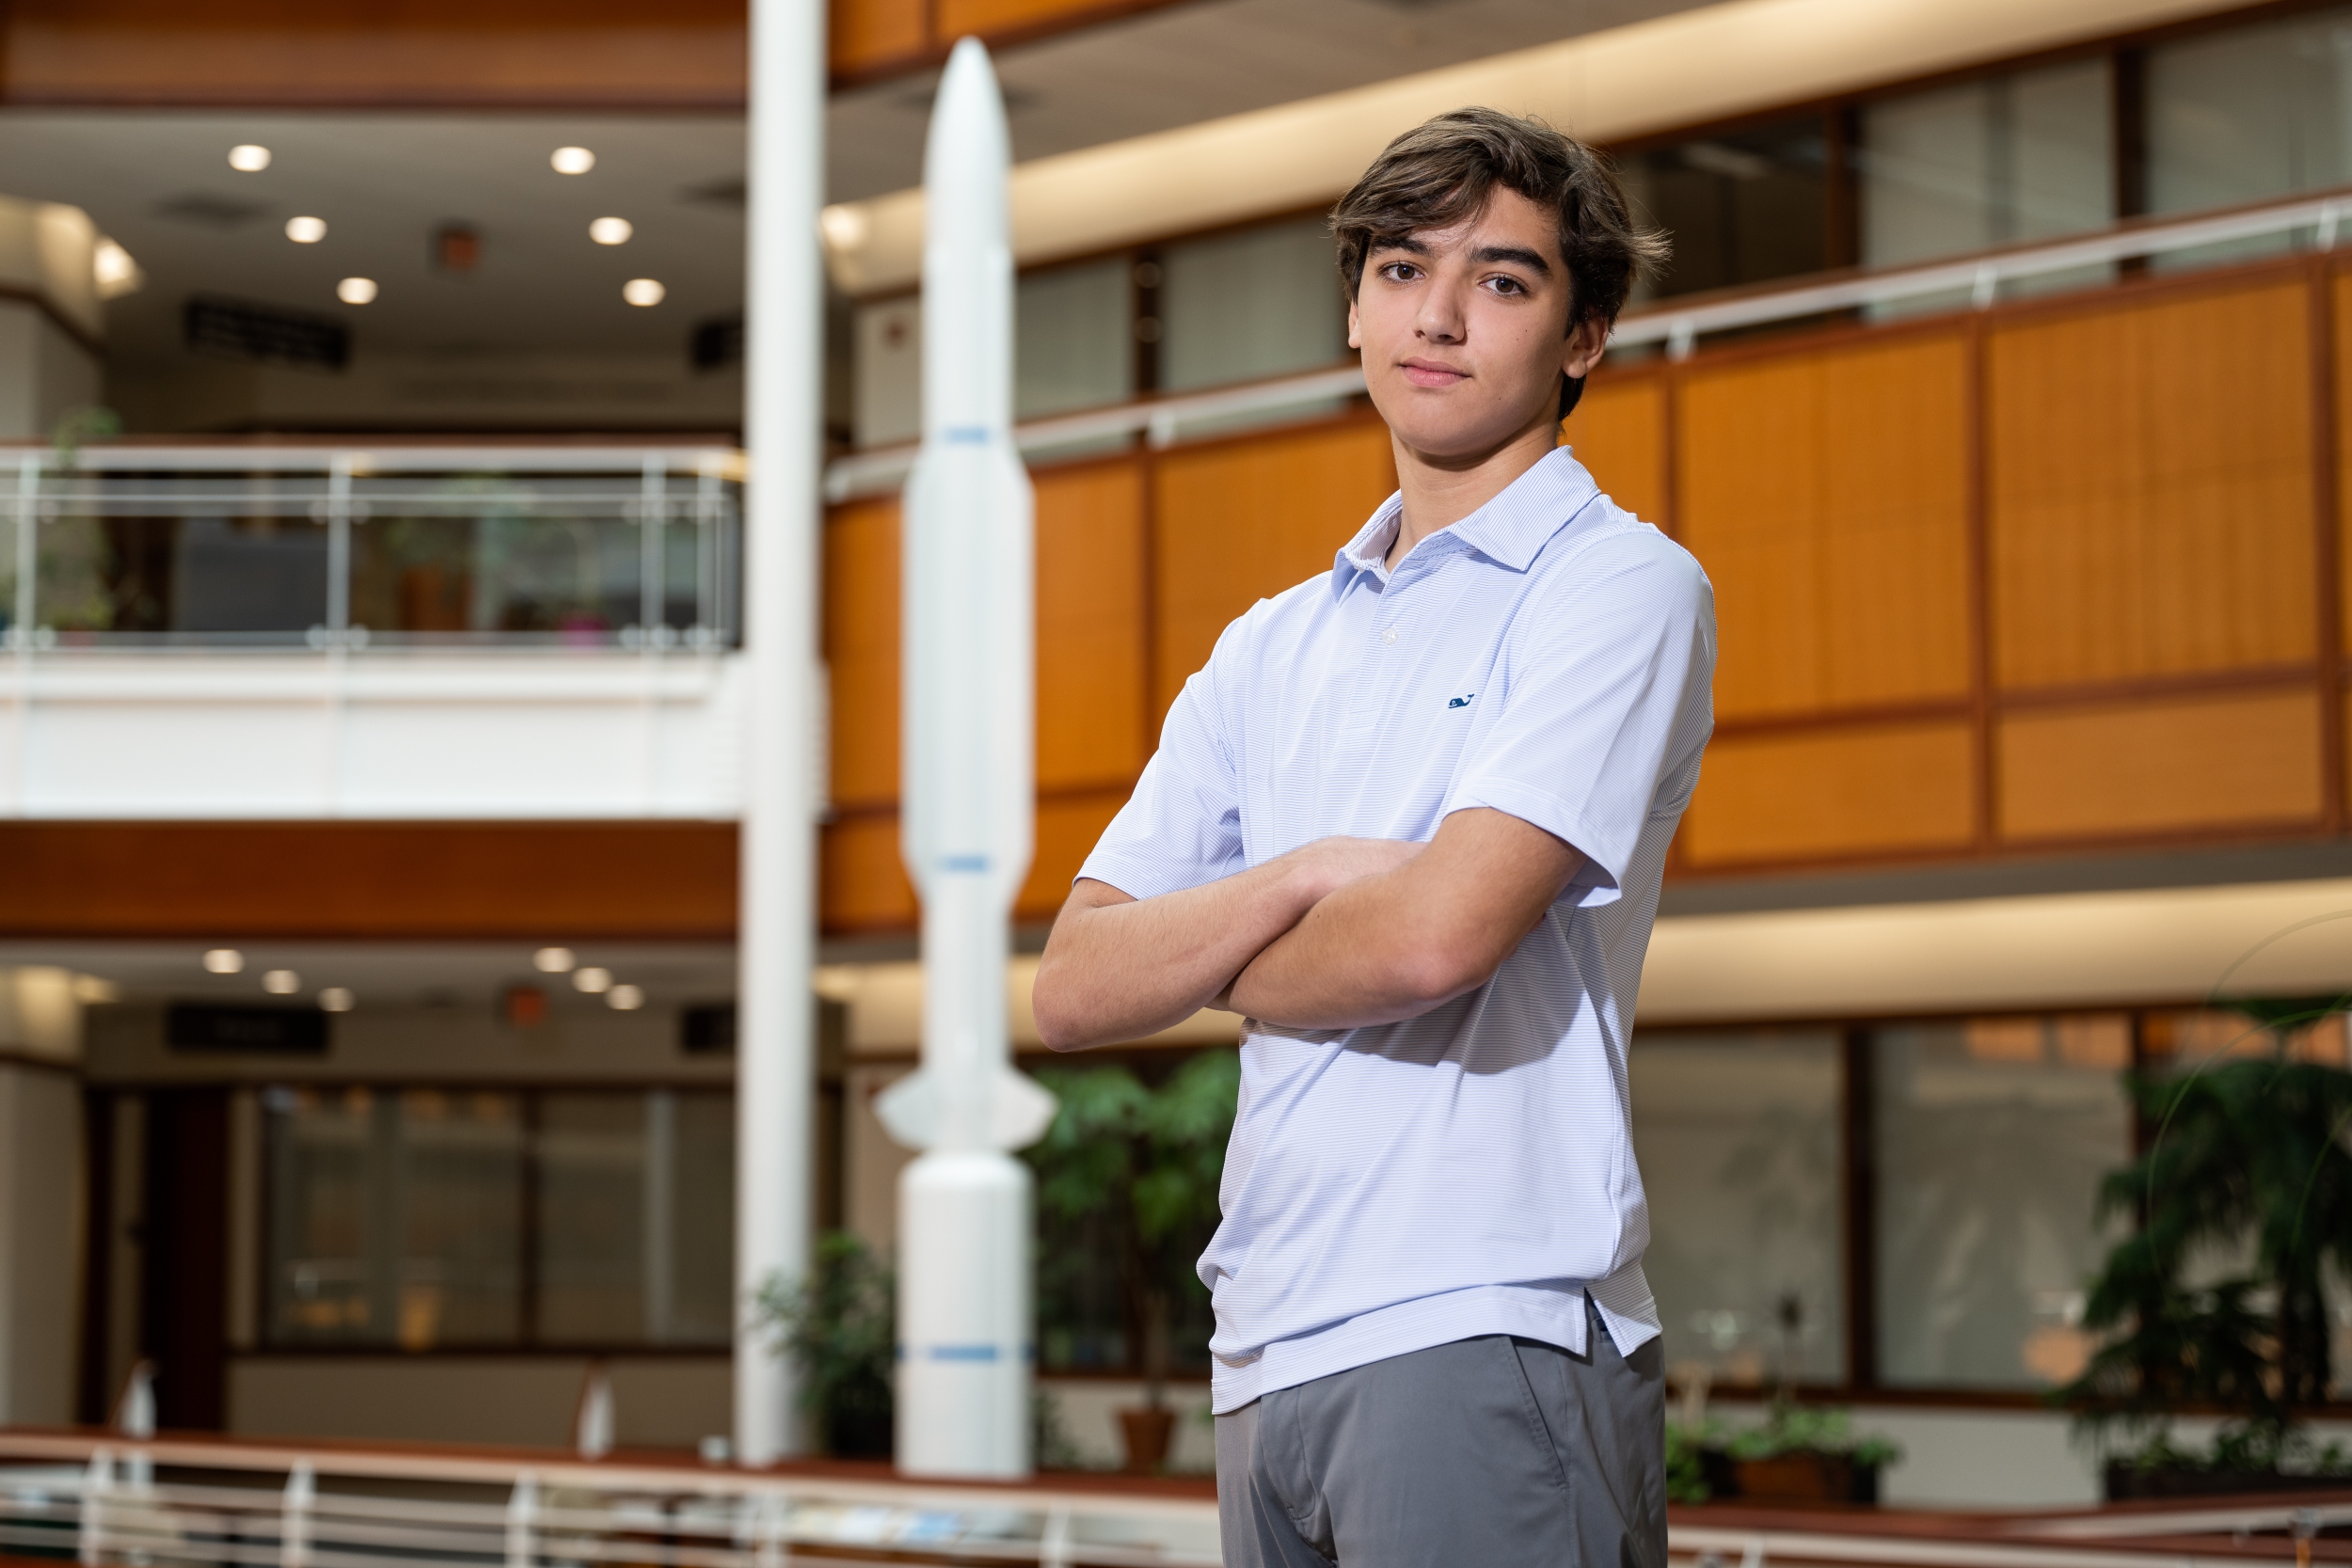 Ryan Wempen with the Standard Missile on display in Lincoln Laboratory's atrium.